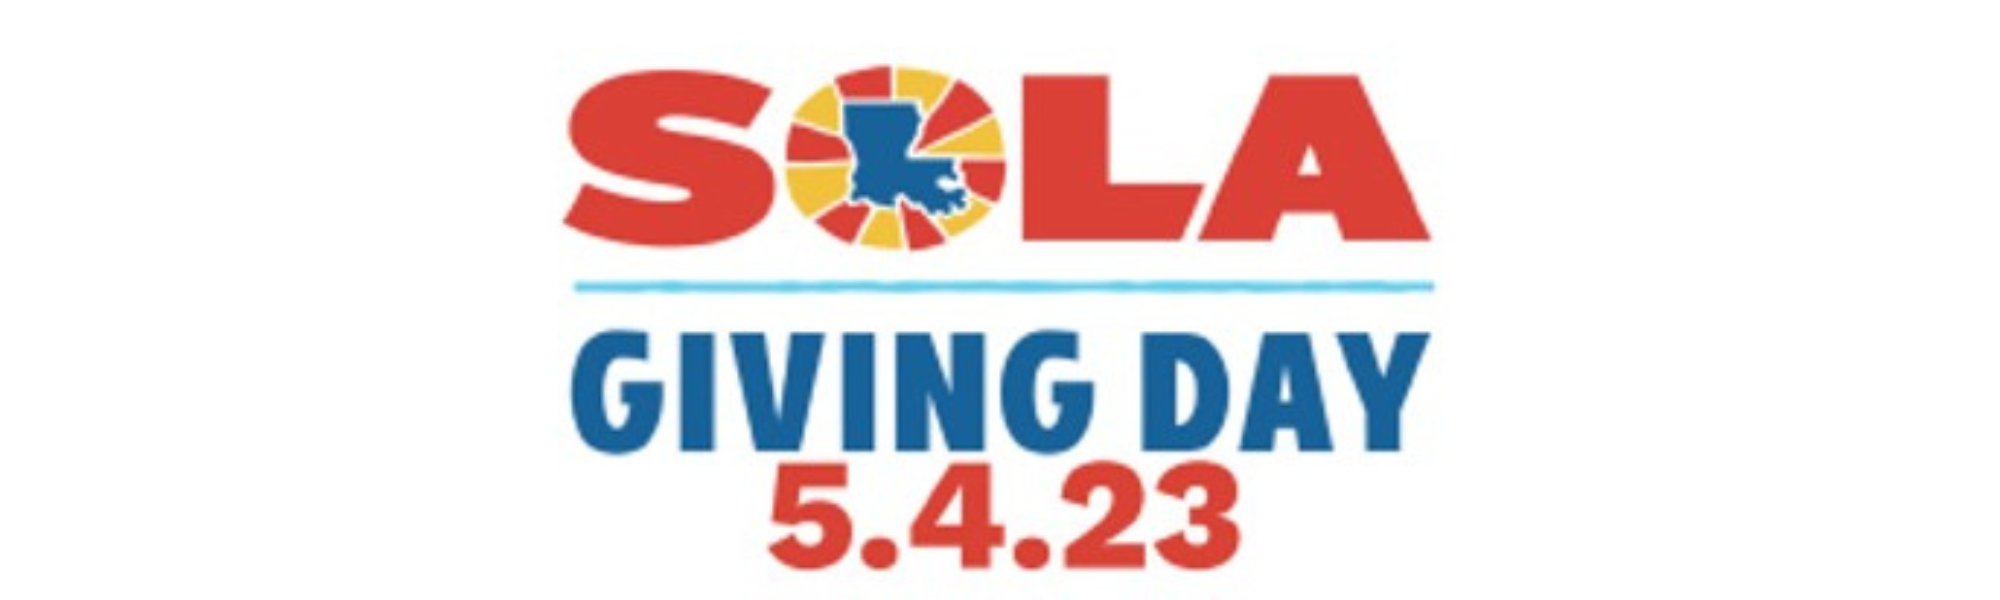 SOLA Giving Day is on May 4